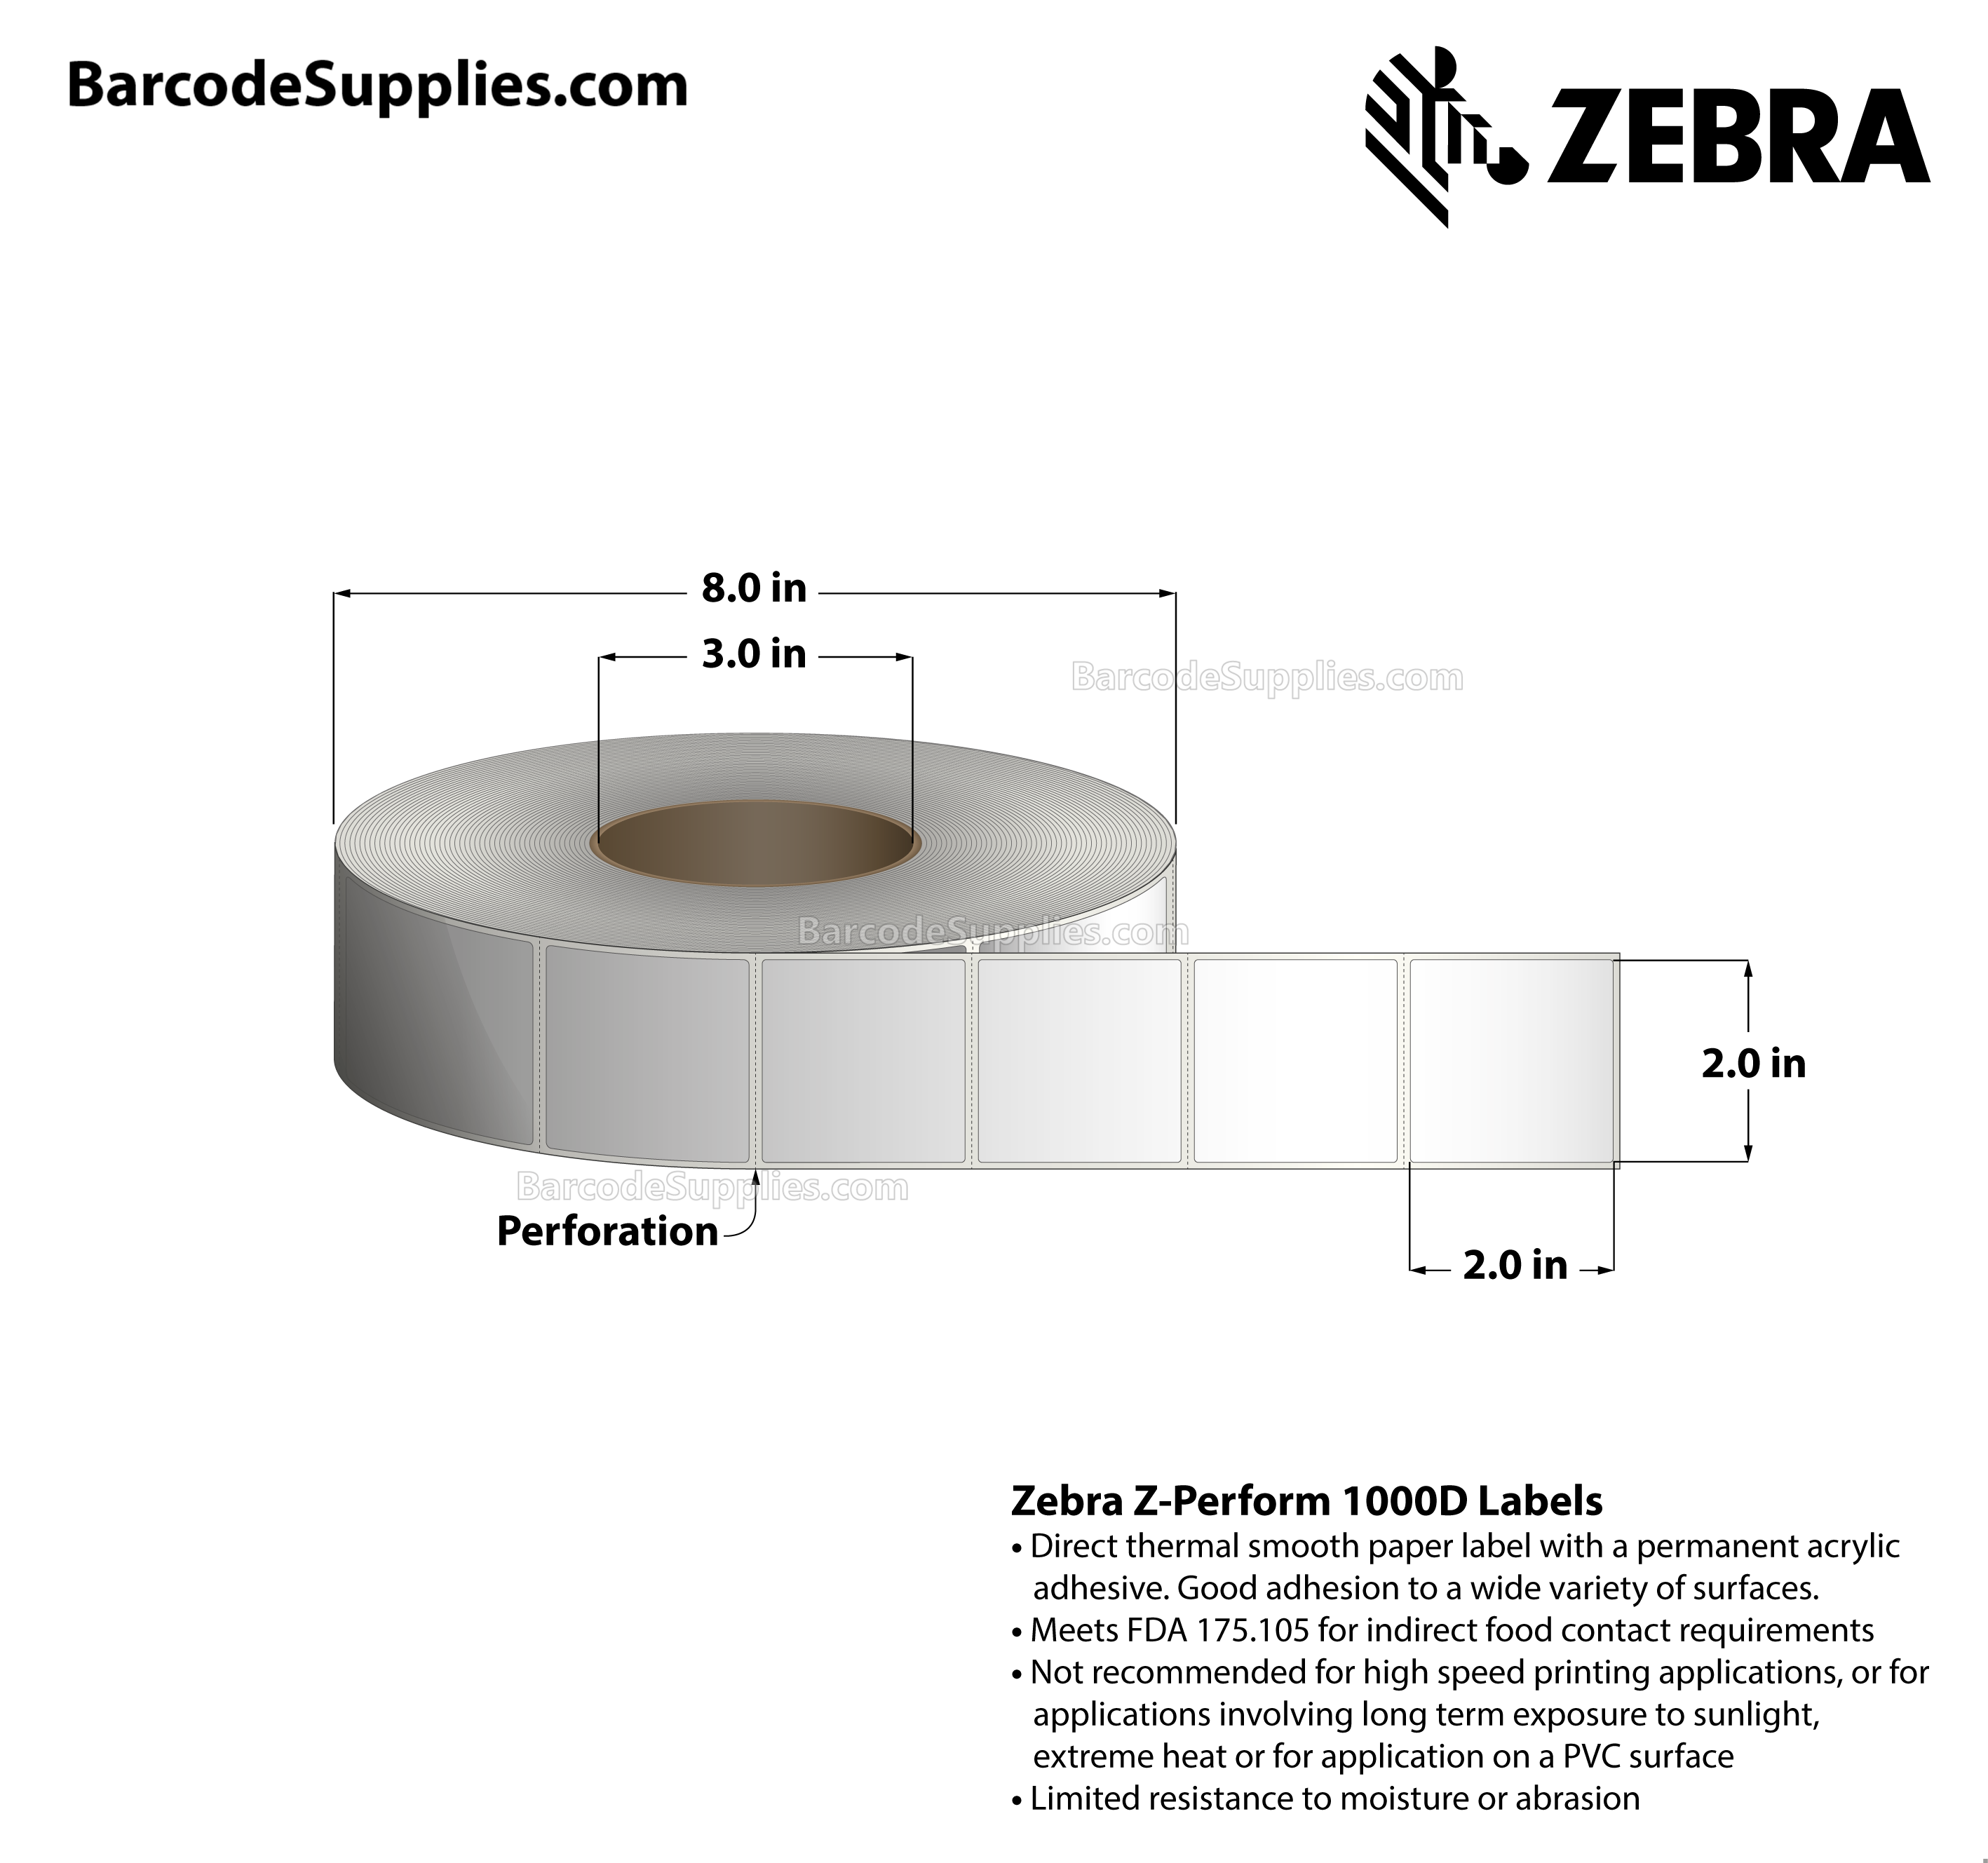 2 x 2 Direct Thermal White Z-Perform 1000D Labels With Permanent Adhesive - Perforated - 2765 Labels Per Roll - Carton Of 6 Rolls - 16590 Labels Total - MPN: 10028310